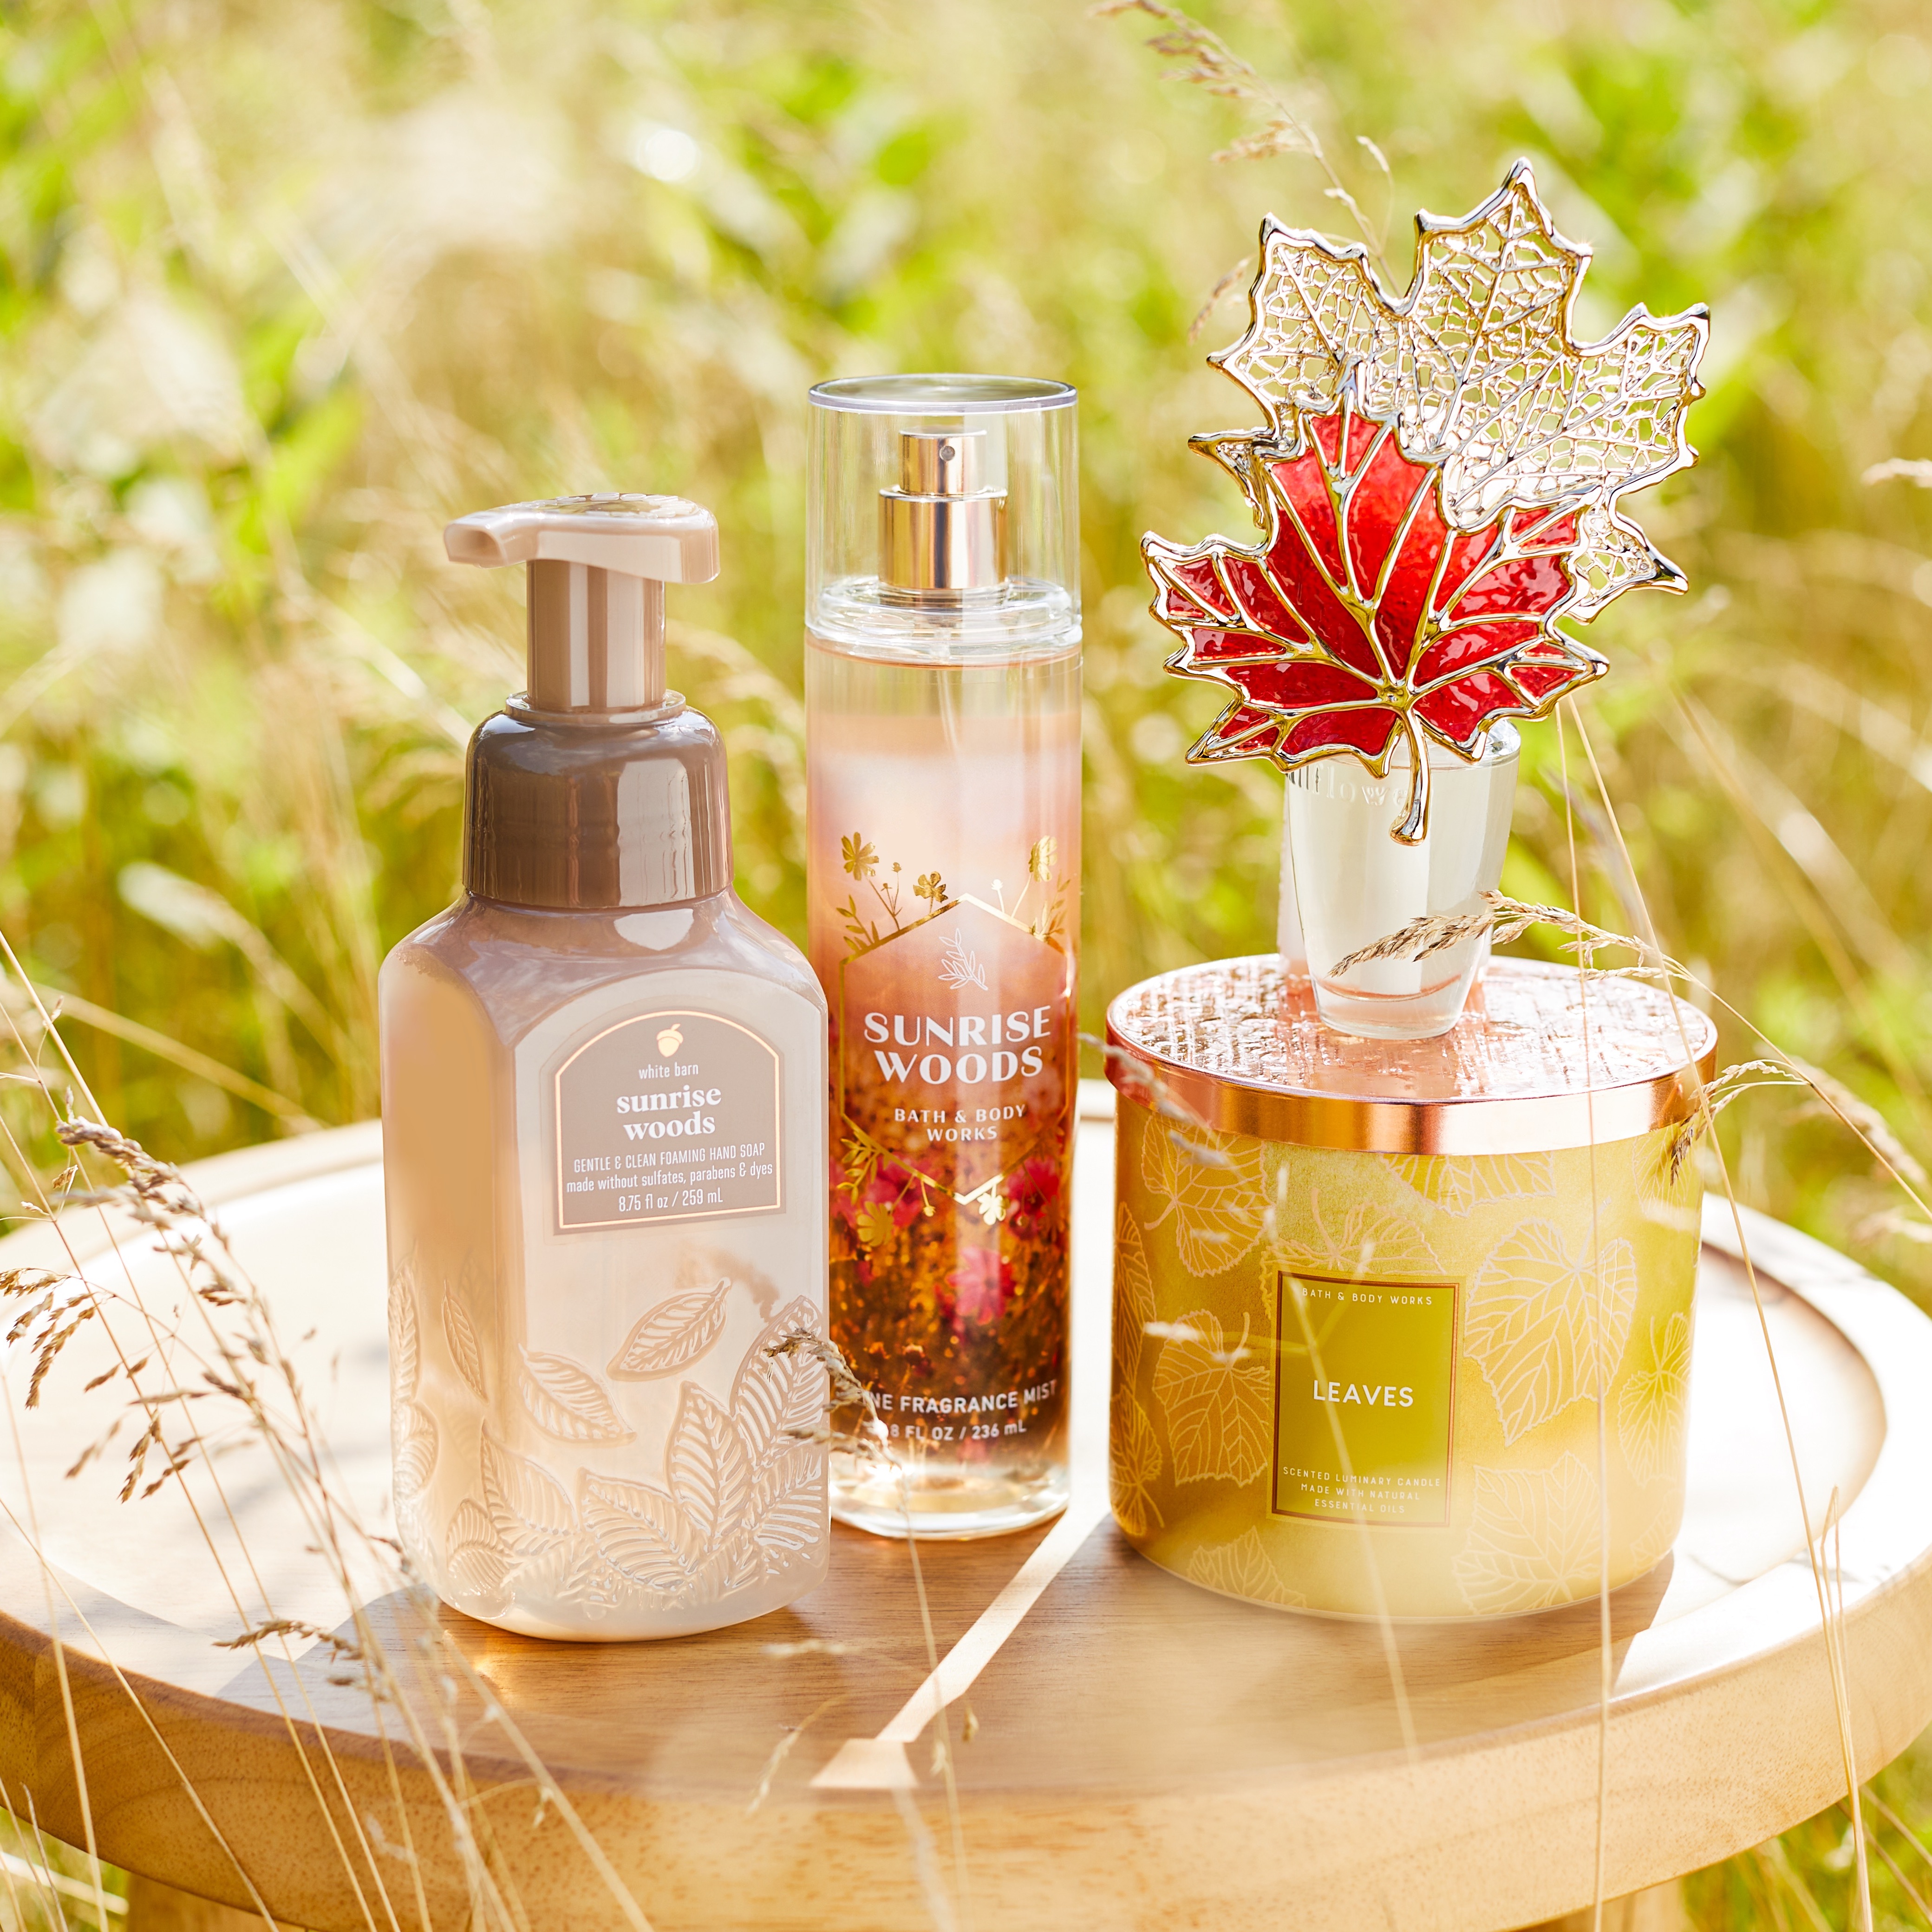 Can you BELEAF it?! Fall is HERE at Bath & Body Works!